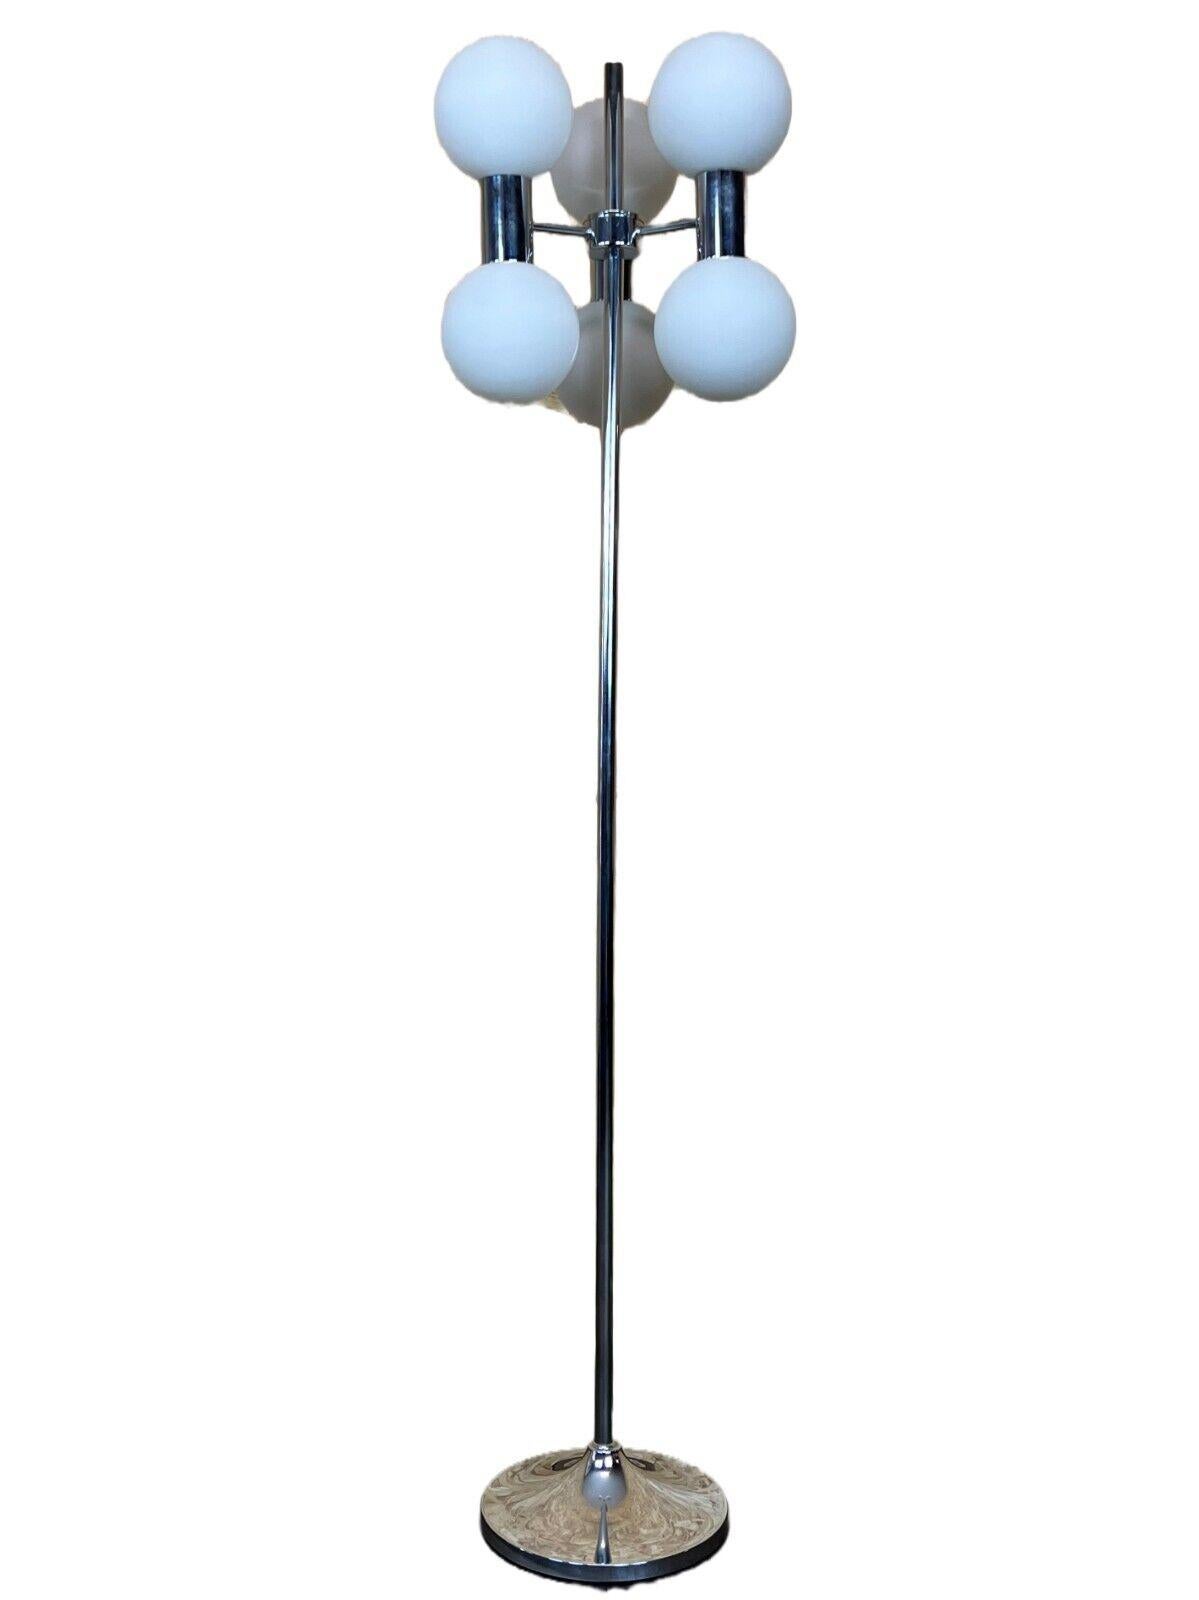 60s 70s lamp light floor lamp metal glass space age design

Object: spherical lamp

Manufacturer:

Condition: good

Age: around 1960-1970

Dimensions:

Height = 149cm
Diameter = 35cm

Other notes:

6x E14 socket

The pictures